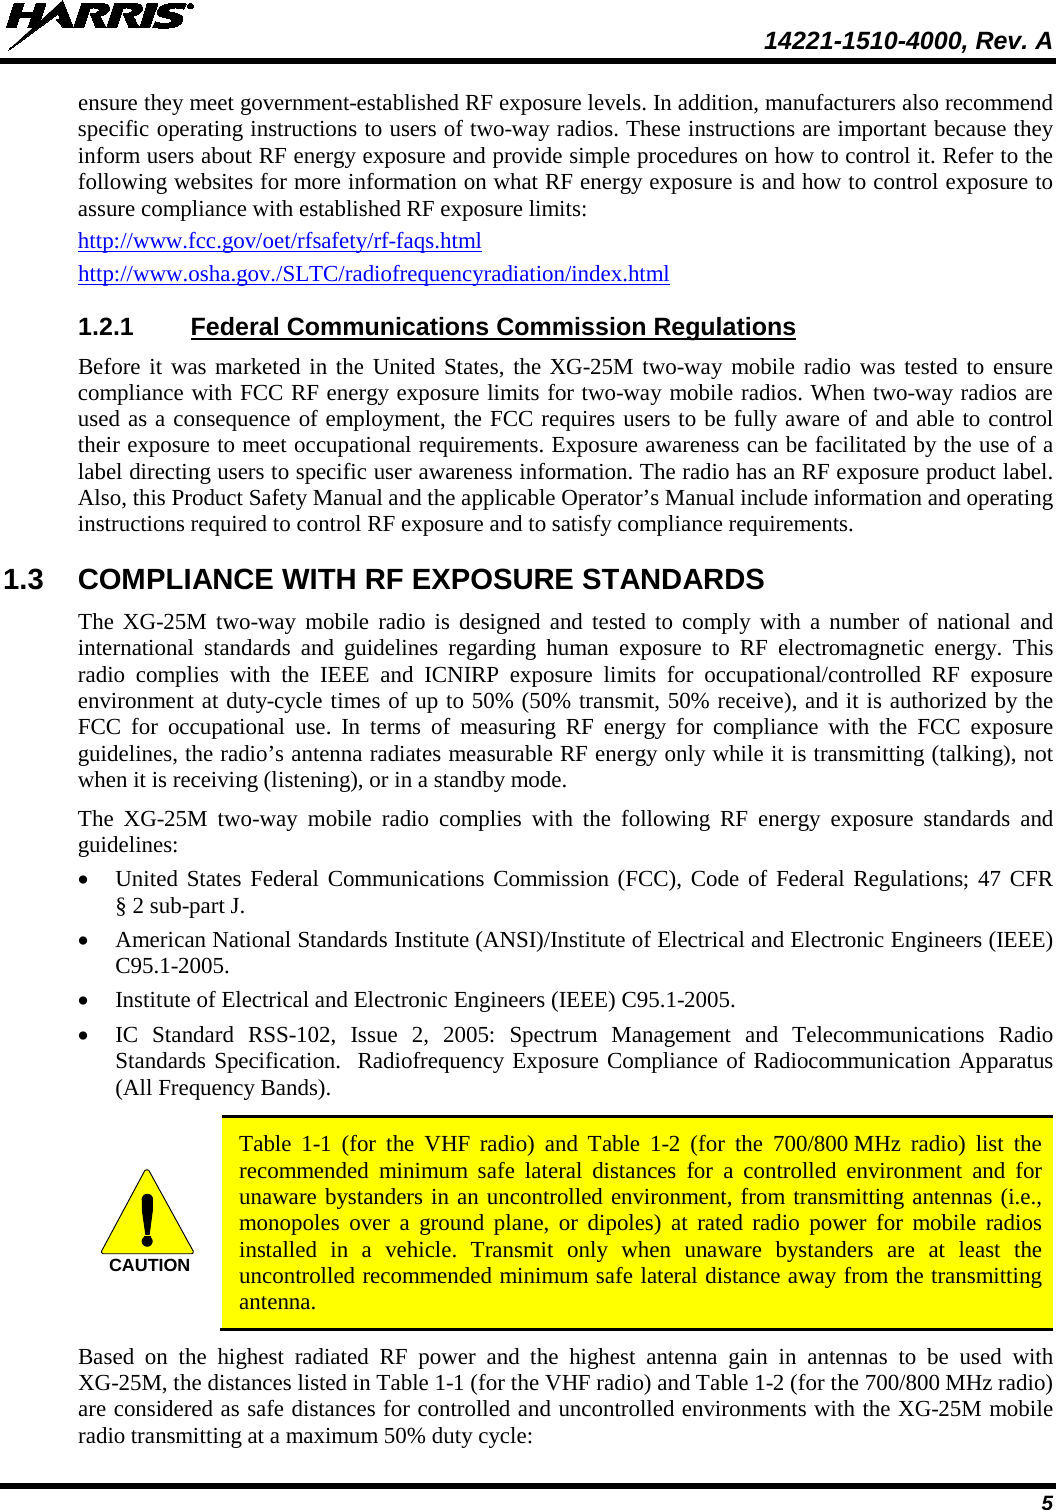  14221-1510-4000, Rev. A 5 ensure they meet government-established RF exposure levels. In addition, manufacturers also recommend specific operating instructions to users of two-way radios. These instructions are important because they inform users about RF energy exposure and provide simple procedures on how to control it. Refer to the following websites for more information on what RF energy exposure is and how to control exposure to assure compliance with established RF exposure limits: http://www.fcc.gov/oet/rfsafety/rf-faqs.html http://www.osha.gov./SLTC/radiofrequencyradiation/index.html 1.2.1 Federal Communications Commission Regulations Before it was marketed in the United States, the XG-25M two-way mobile radio was tested to ensure compliance with FCC RF energy exposure limits for two-way mobile radios. When two-way radios are used as a consequence of employment, the FCC requires users to be fully aware of and able to control their exposure to meet occupational requirements. Exposure awareness can be facilitated by the use of a label directing users to specific user awareness information. The radio has an RF exposure product label. Also, this Product Safety Manual and the applicable Operator’s Manual include information and operating instructions required to control RF exposure and to satisfy compliance requirements. 1.3 COMPLIANCE WITH RF EXPOSURE STANDARDS The XG-25M two-way  mobile  radio is designed and tested to comply with a number of national and international standards and guidelines regarding human exposure to RF electromagnetic energy. This radio complies with the IEEE and ICNIRP exposure limits for occupational/controlled RF exposure environment at duty-cycle times of up to 50% (50% transmit, 50% receive), and it is authorized by the FCC for occupational use. In terms of measuring RF energy for compliance with the FCC exposure guidelines, the radio’s antenna radiates measurable RF energy only while it is transmitting (talking), not when it is receiving (listening), or in a standby mode. The  XG-25M  two-way  mobile  radio complies with the following RF energy exposure standards and guidelines: • United States Federal Communications Commission (FCC), Code of Federal Regulations; 47 CFR § 2 sub-part J. • American National Standards Institute (ANSI)/Institute of Electrical and Electronic Engineers (IEEE) C95.1-2005. • Institute of Electrical and Electronic Engineers (IEEE) C95.1-2005. • IC  Standard RSS-102, Issue 2, 2005: Spectrum Management and Telecommunications Radio Standards Specification.  Radiofrequency Exposure Compliance of Radiocommunication Apparatus (All Frequency Bands).   Table  1-1  (for the VHF radio) and  Table  1-2  (for the 700/800 MHz radio) list the recommended minimum safe  lateral  distances for a controlled environment and for unaware bystanders in an uncontrolled environment, from transmitting antennas (i.e., monopoles over a ground plane, or dipoles) at rated radio power for mobile radios installed in a vehicle. Transmit only when unaware bystanders are at least the uncontrolled recommended minimum safe lateral distance away from the transmitting antenna. Based on the highest radiated RF power and the highest antenna gain in antennas to be used with XG-25M, the distances listed in Table 1-1 (for the VHF radio) and Table 1-2 (for the 700/800 MHz radio) are considered as safe distances for controlled and uncontrolled environments with the XG-25M mobile radio transmitting at a maximum 50% duty cycle: CAUTION